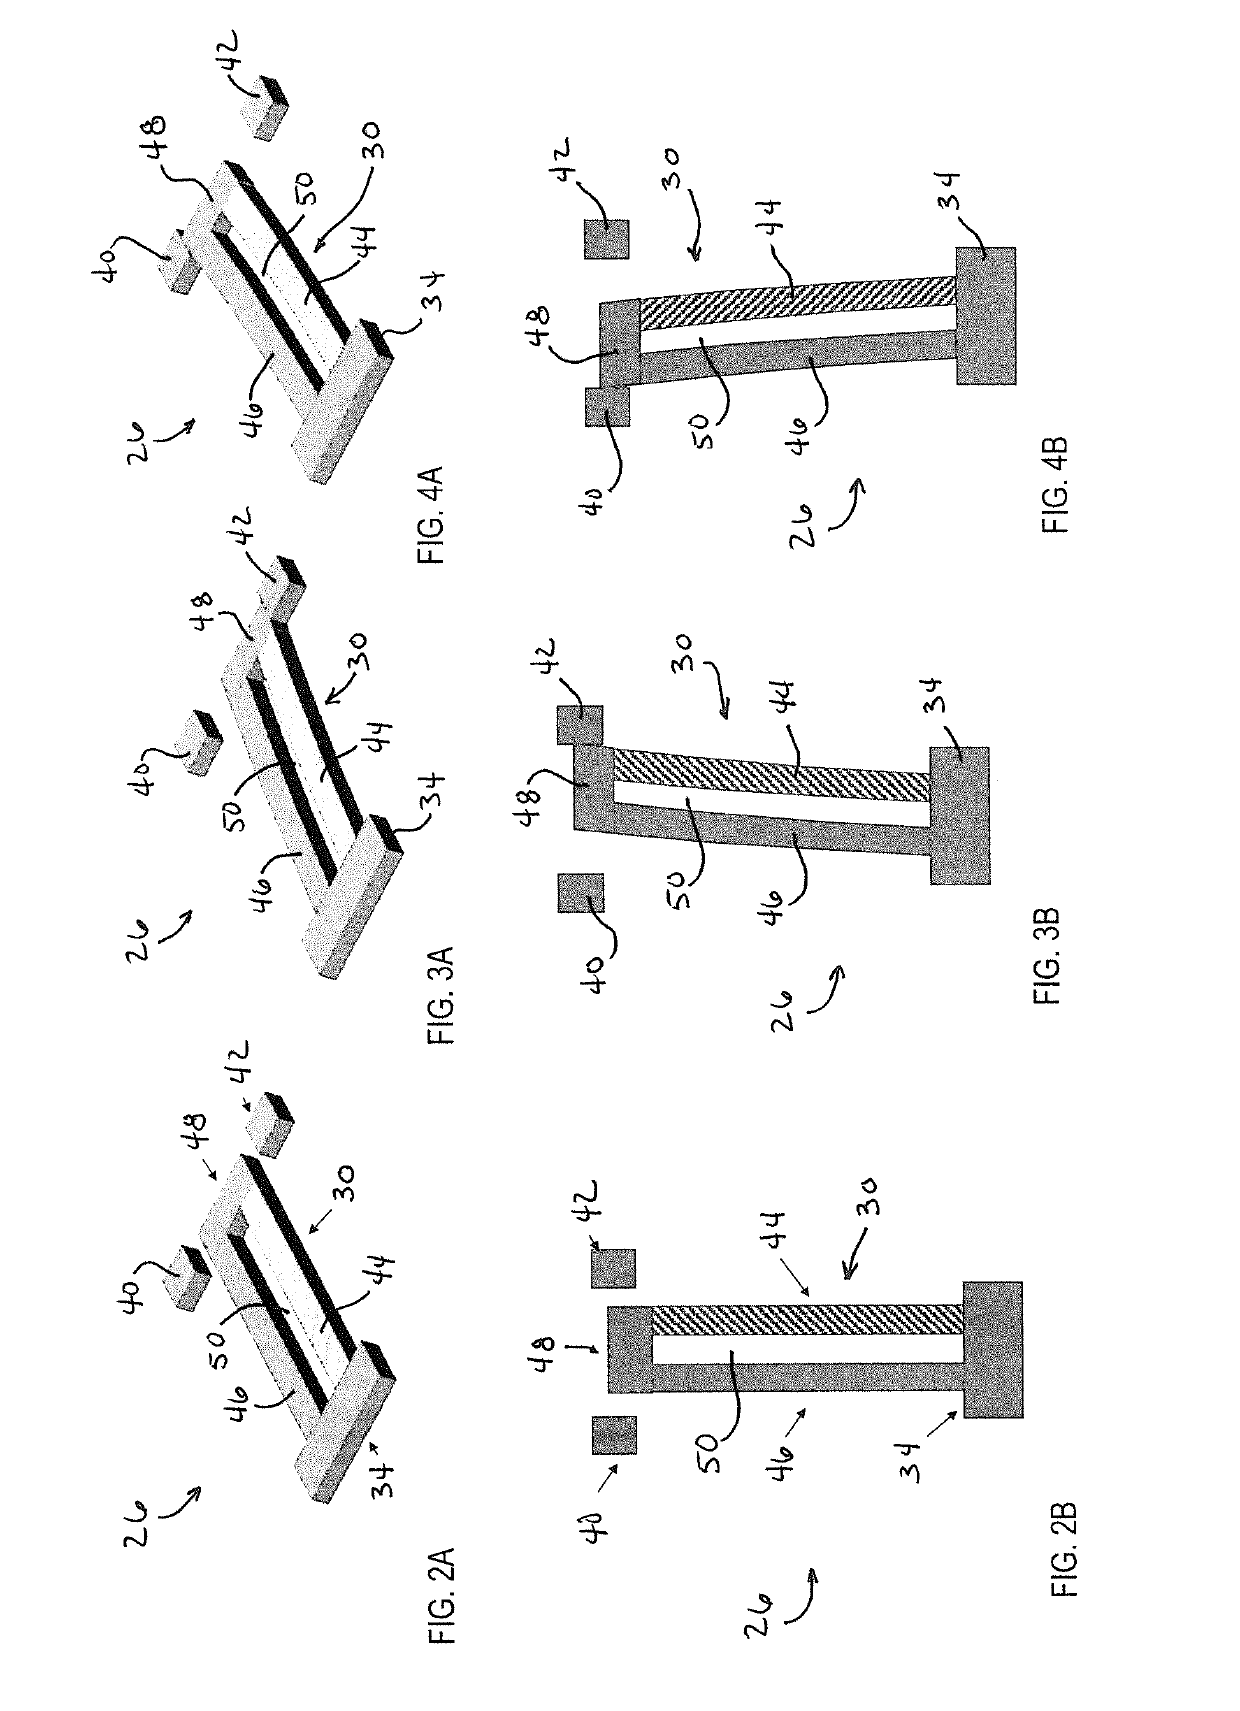 Sensing devices, sensors, and methods for monitoring environmental conditions